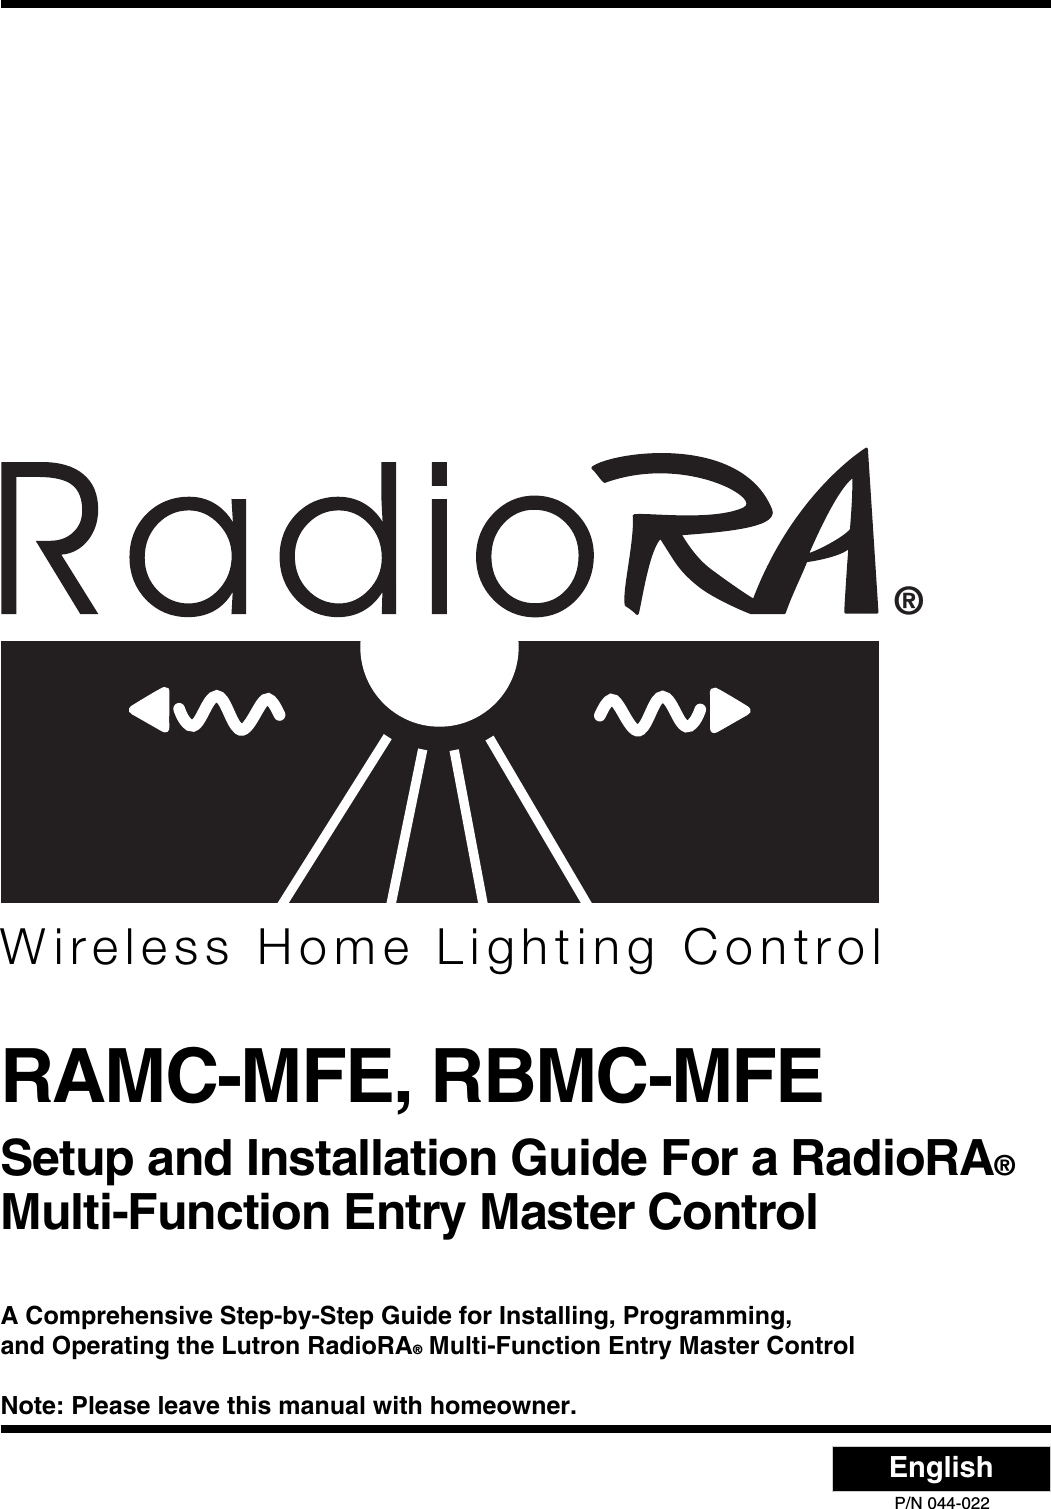 RAMC-MFE, RBMC-MFESetup and Installation Guide For a RadioRA®Multi-Function Entry Master Control®A Comprehensive Step-by-Step Guide for Installing, Programming,and Operating the Lutron RadioRA® Multi-Function Entry Master ControlNote: Please leave this manual with homeowner.Wireless Home Lighting ControlEnglish P/N 044-022